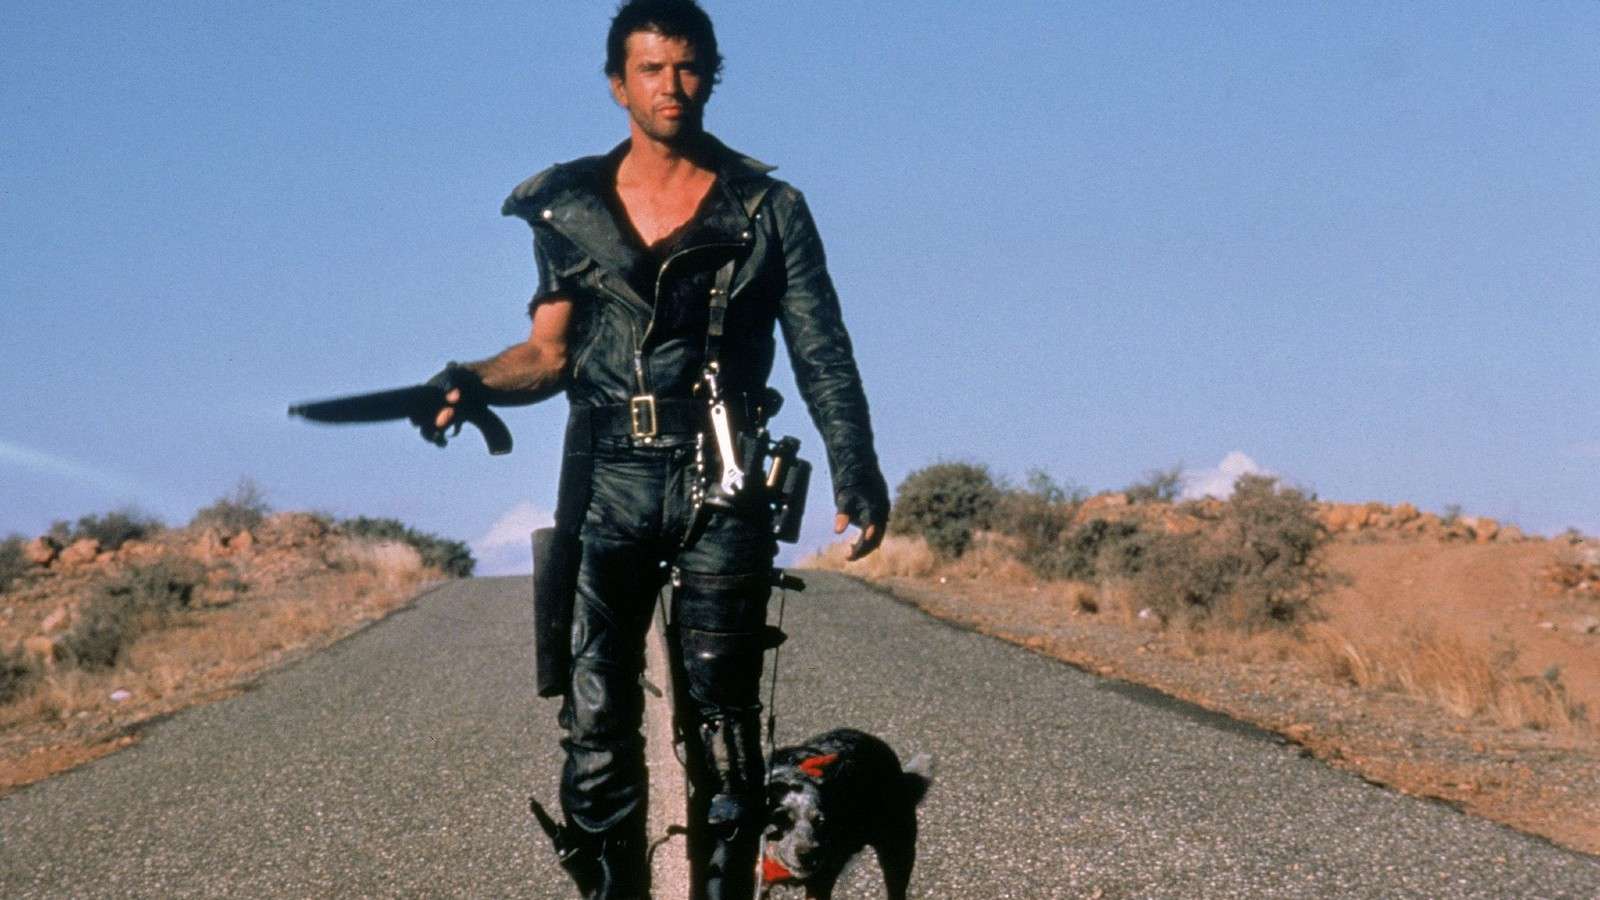 Max and his dog in the wasteland of The Road Warrior.